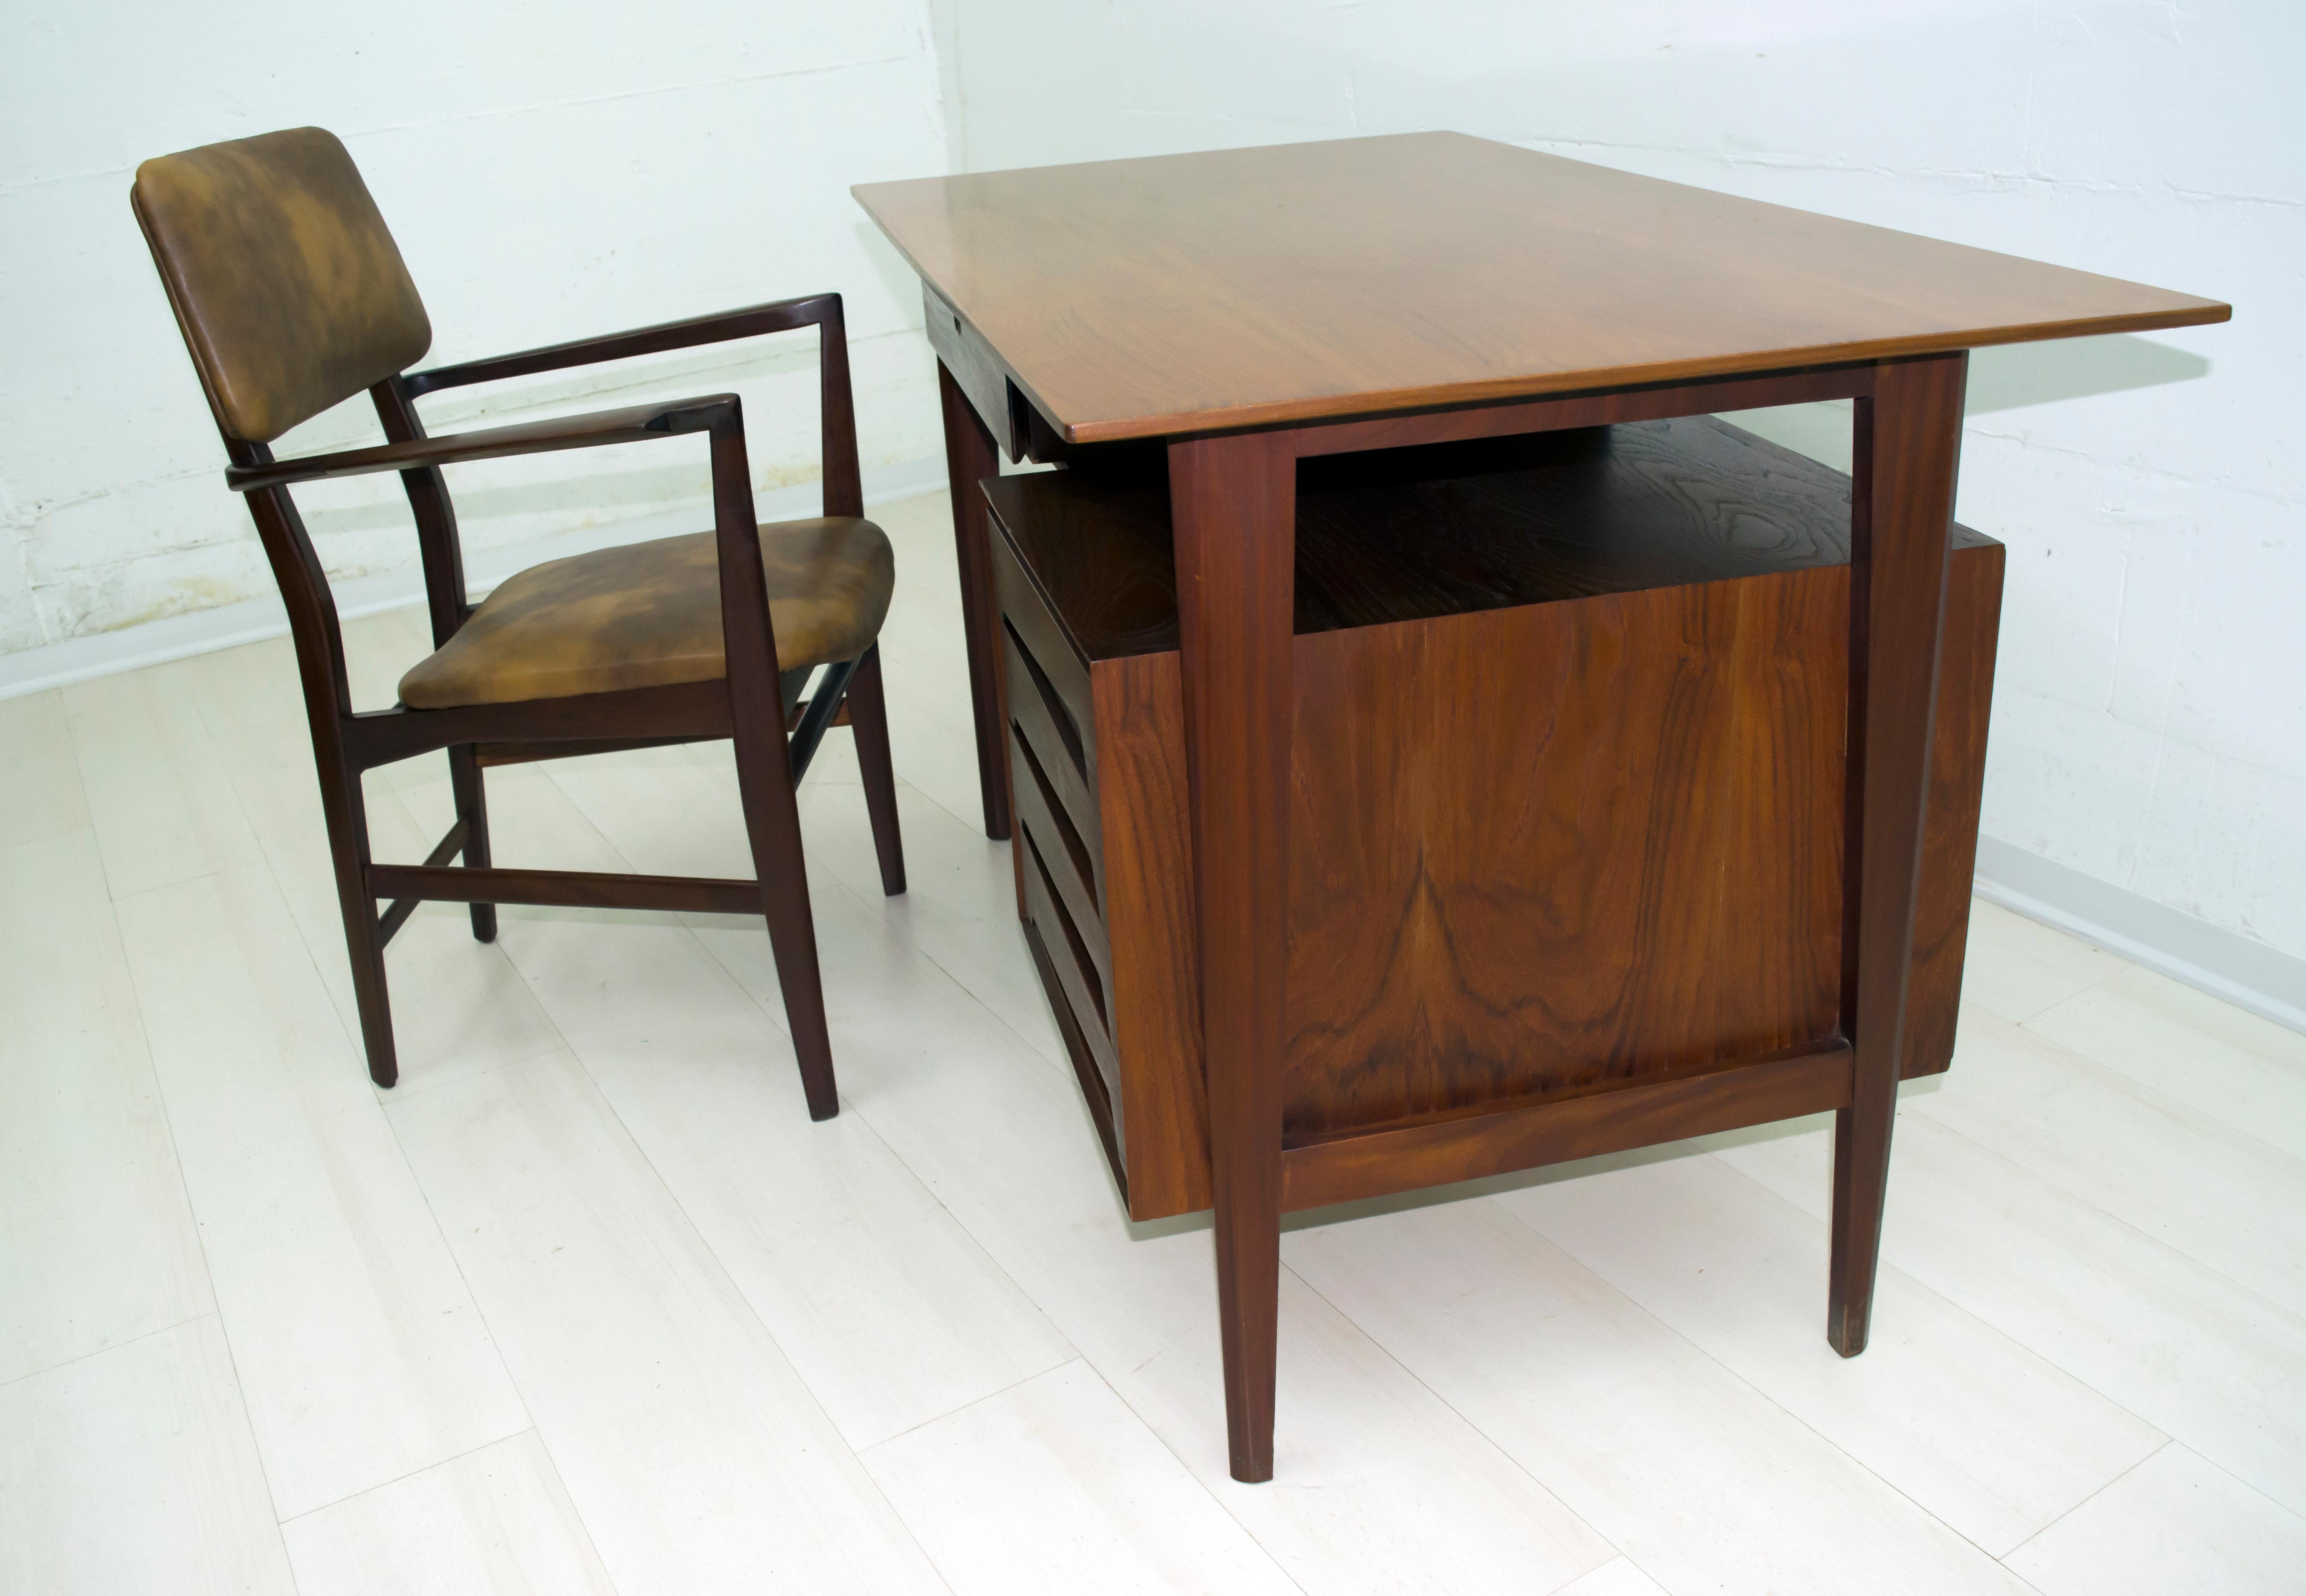 This desk with its chair was designed by the famous Italian design Vittorio Dassi, using teakwood, Italia, 1950s.

The measurements indicated are for the desk only, while the measurements for the chair only are: 
cm L 58 x P 50 x H 90 x S